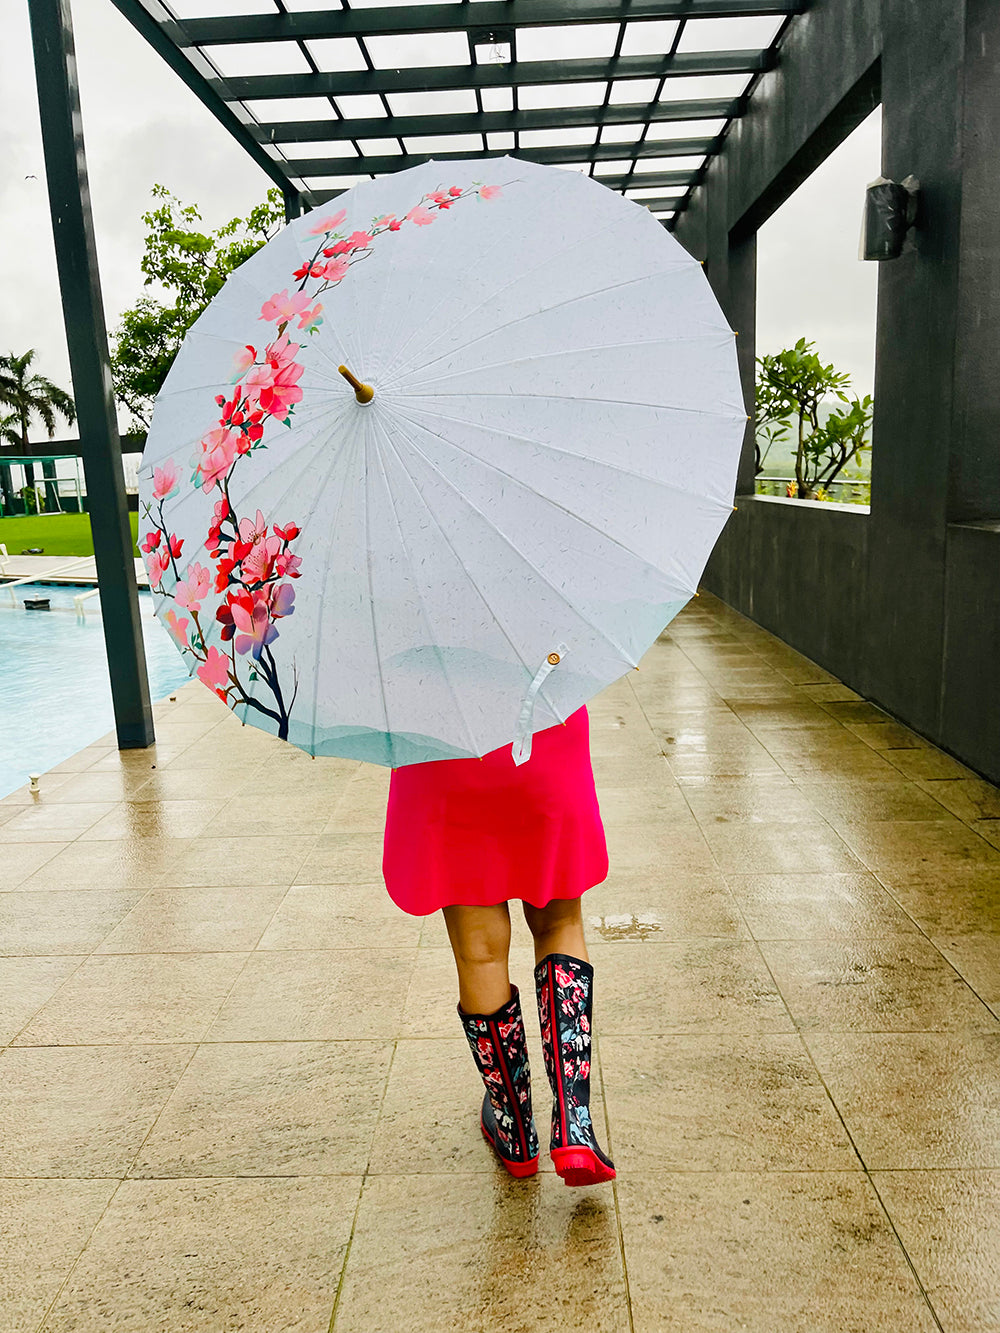 Little Surprise Box, Teal & Pink Floral, Chinese Canopy Style Rain and All season Umbrella